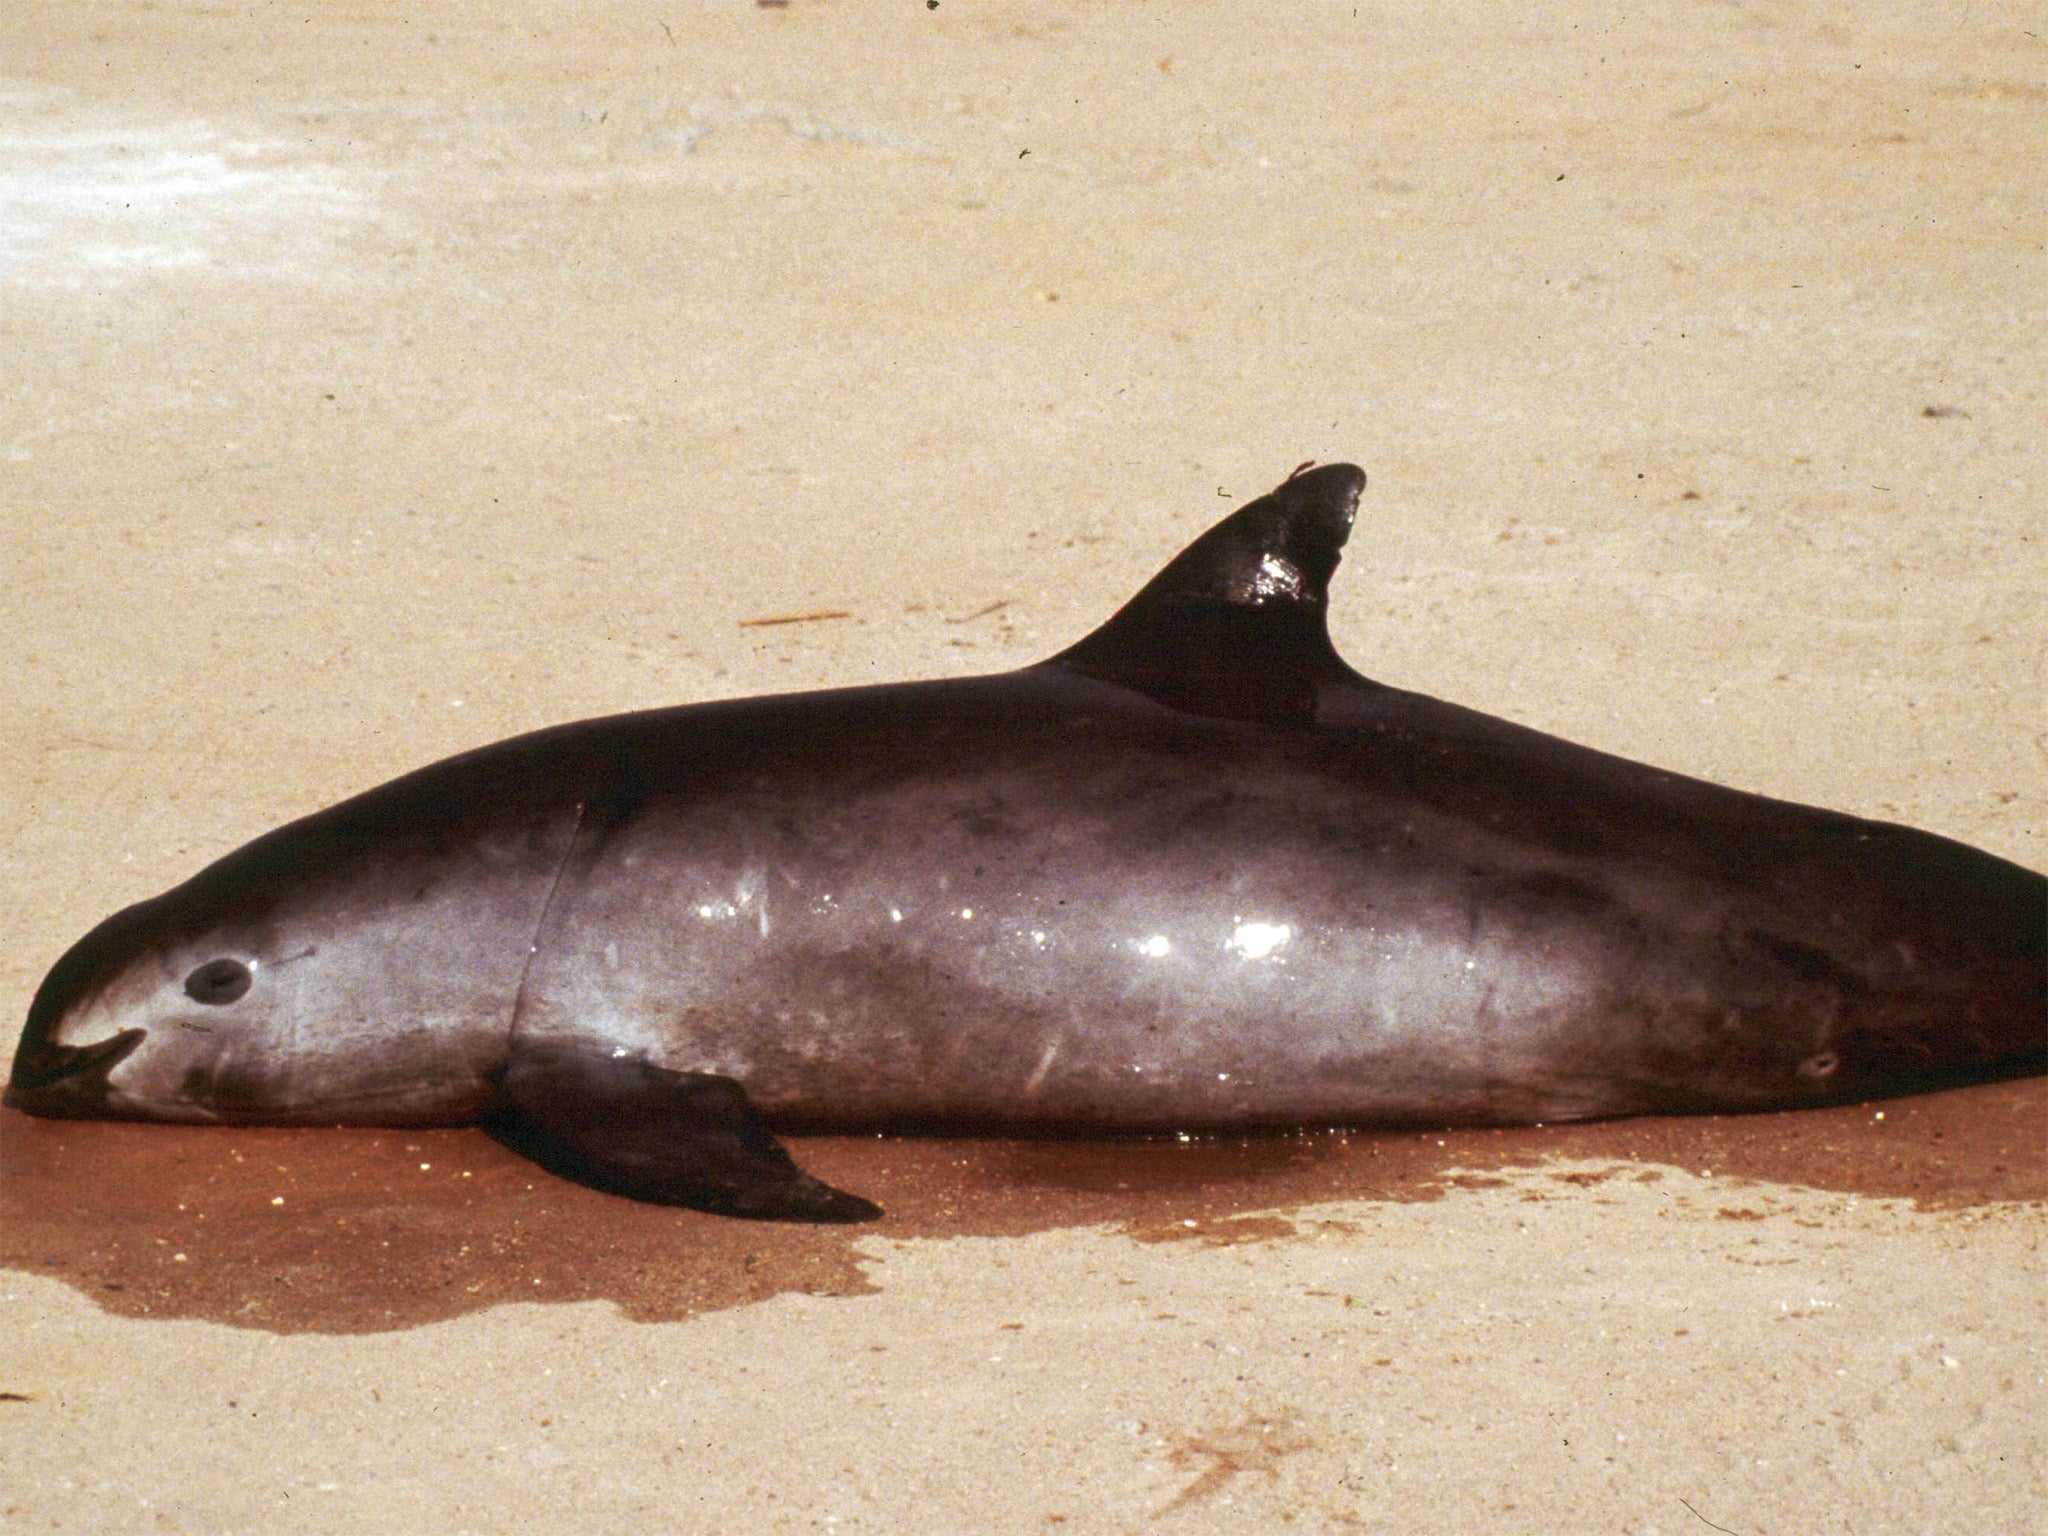 Vaquita One of the world's rarest animals could go extinct in months